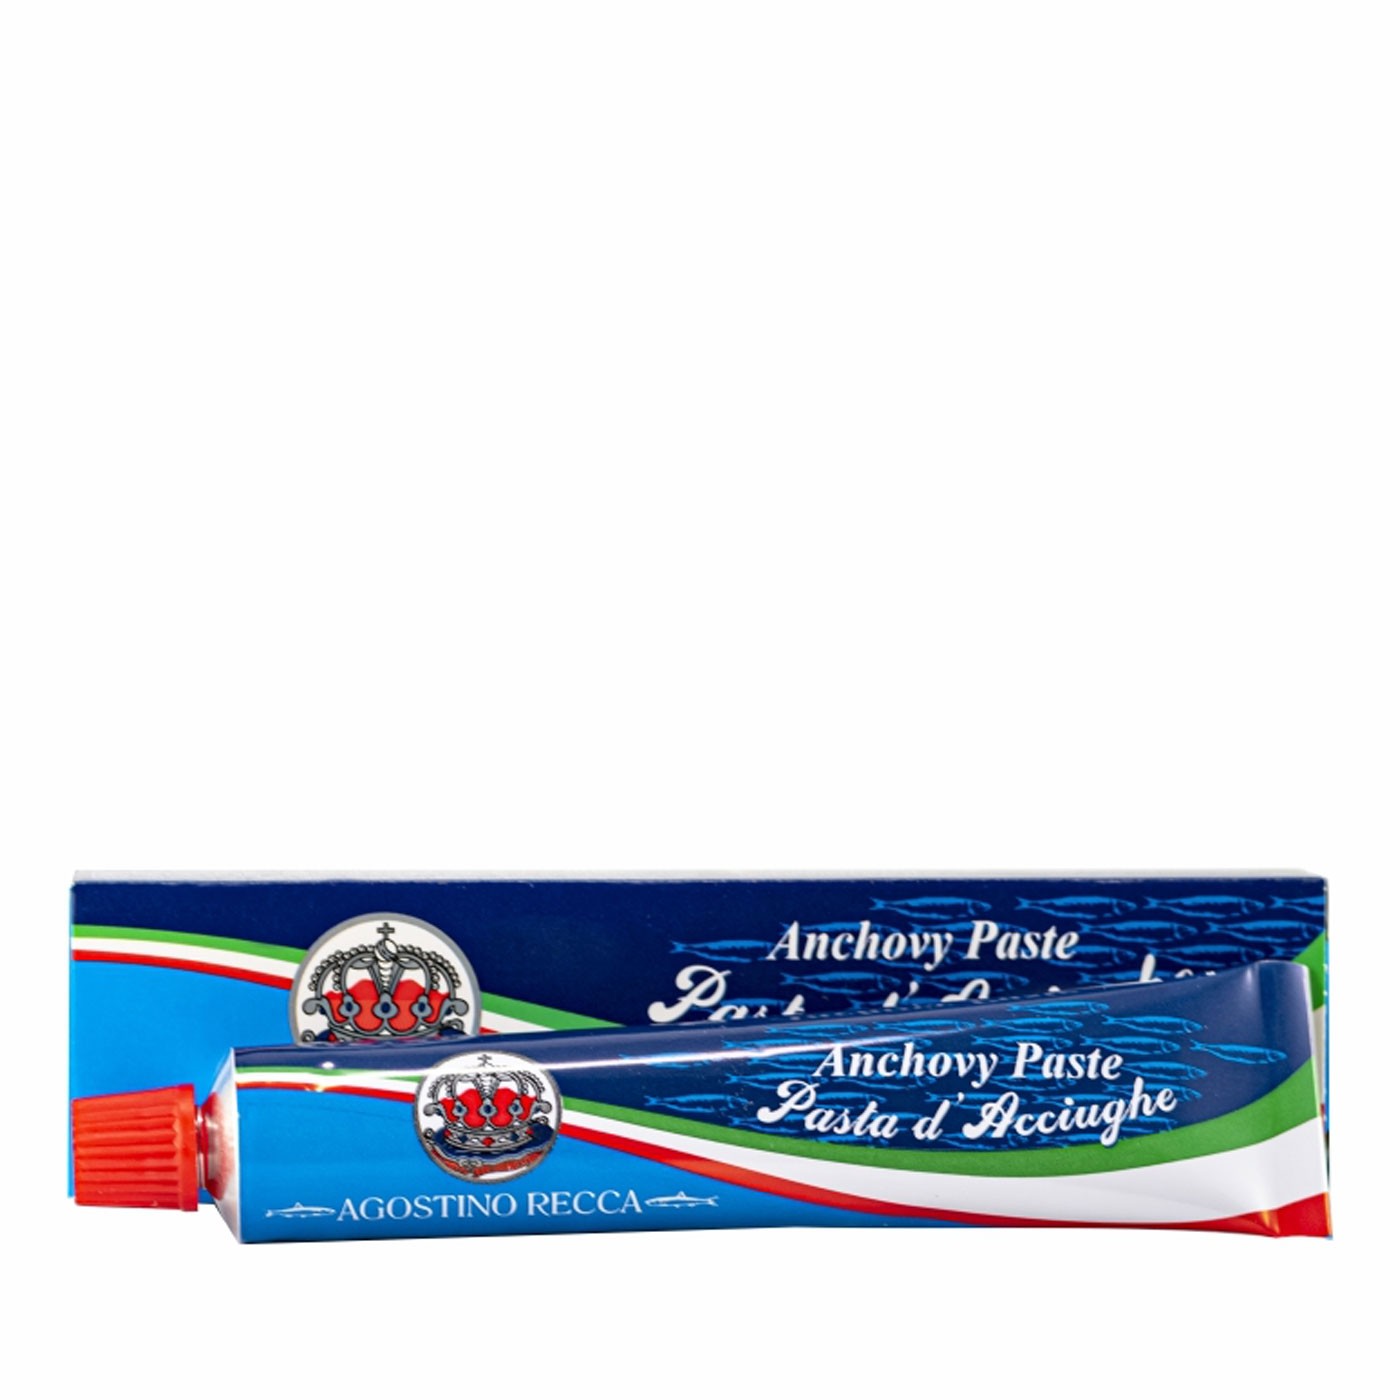 Anchovy Paste 2.12 oz